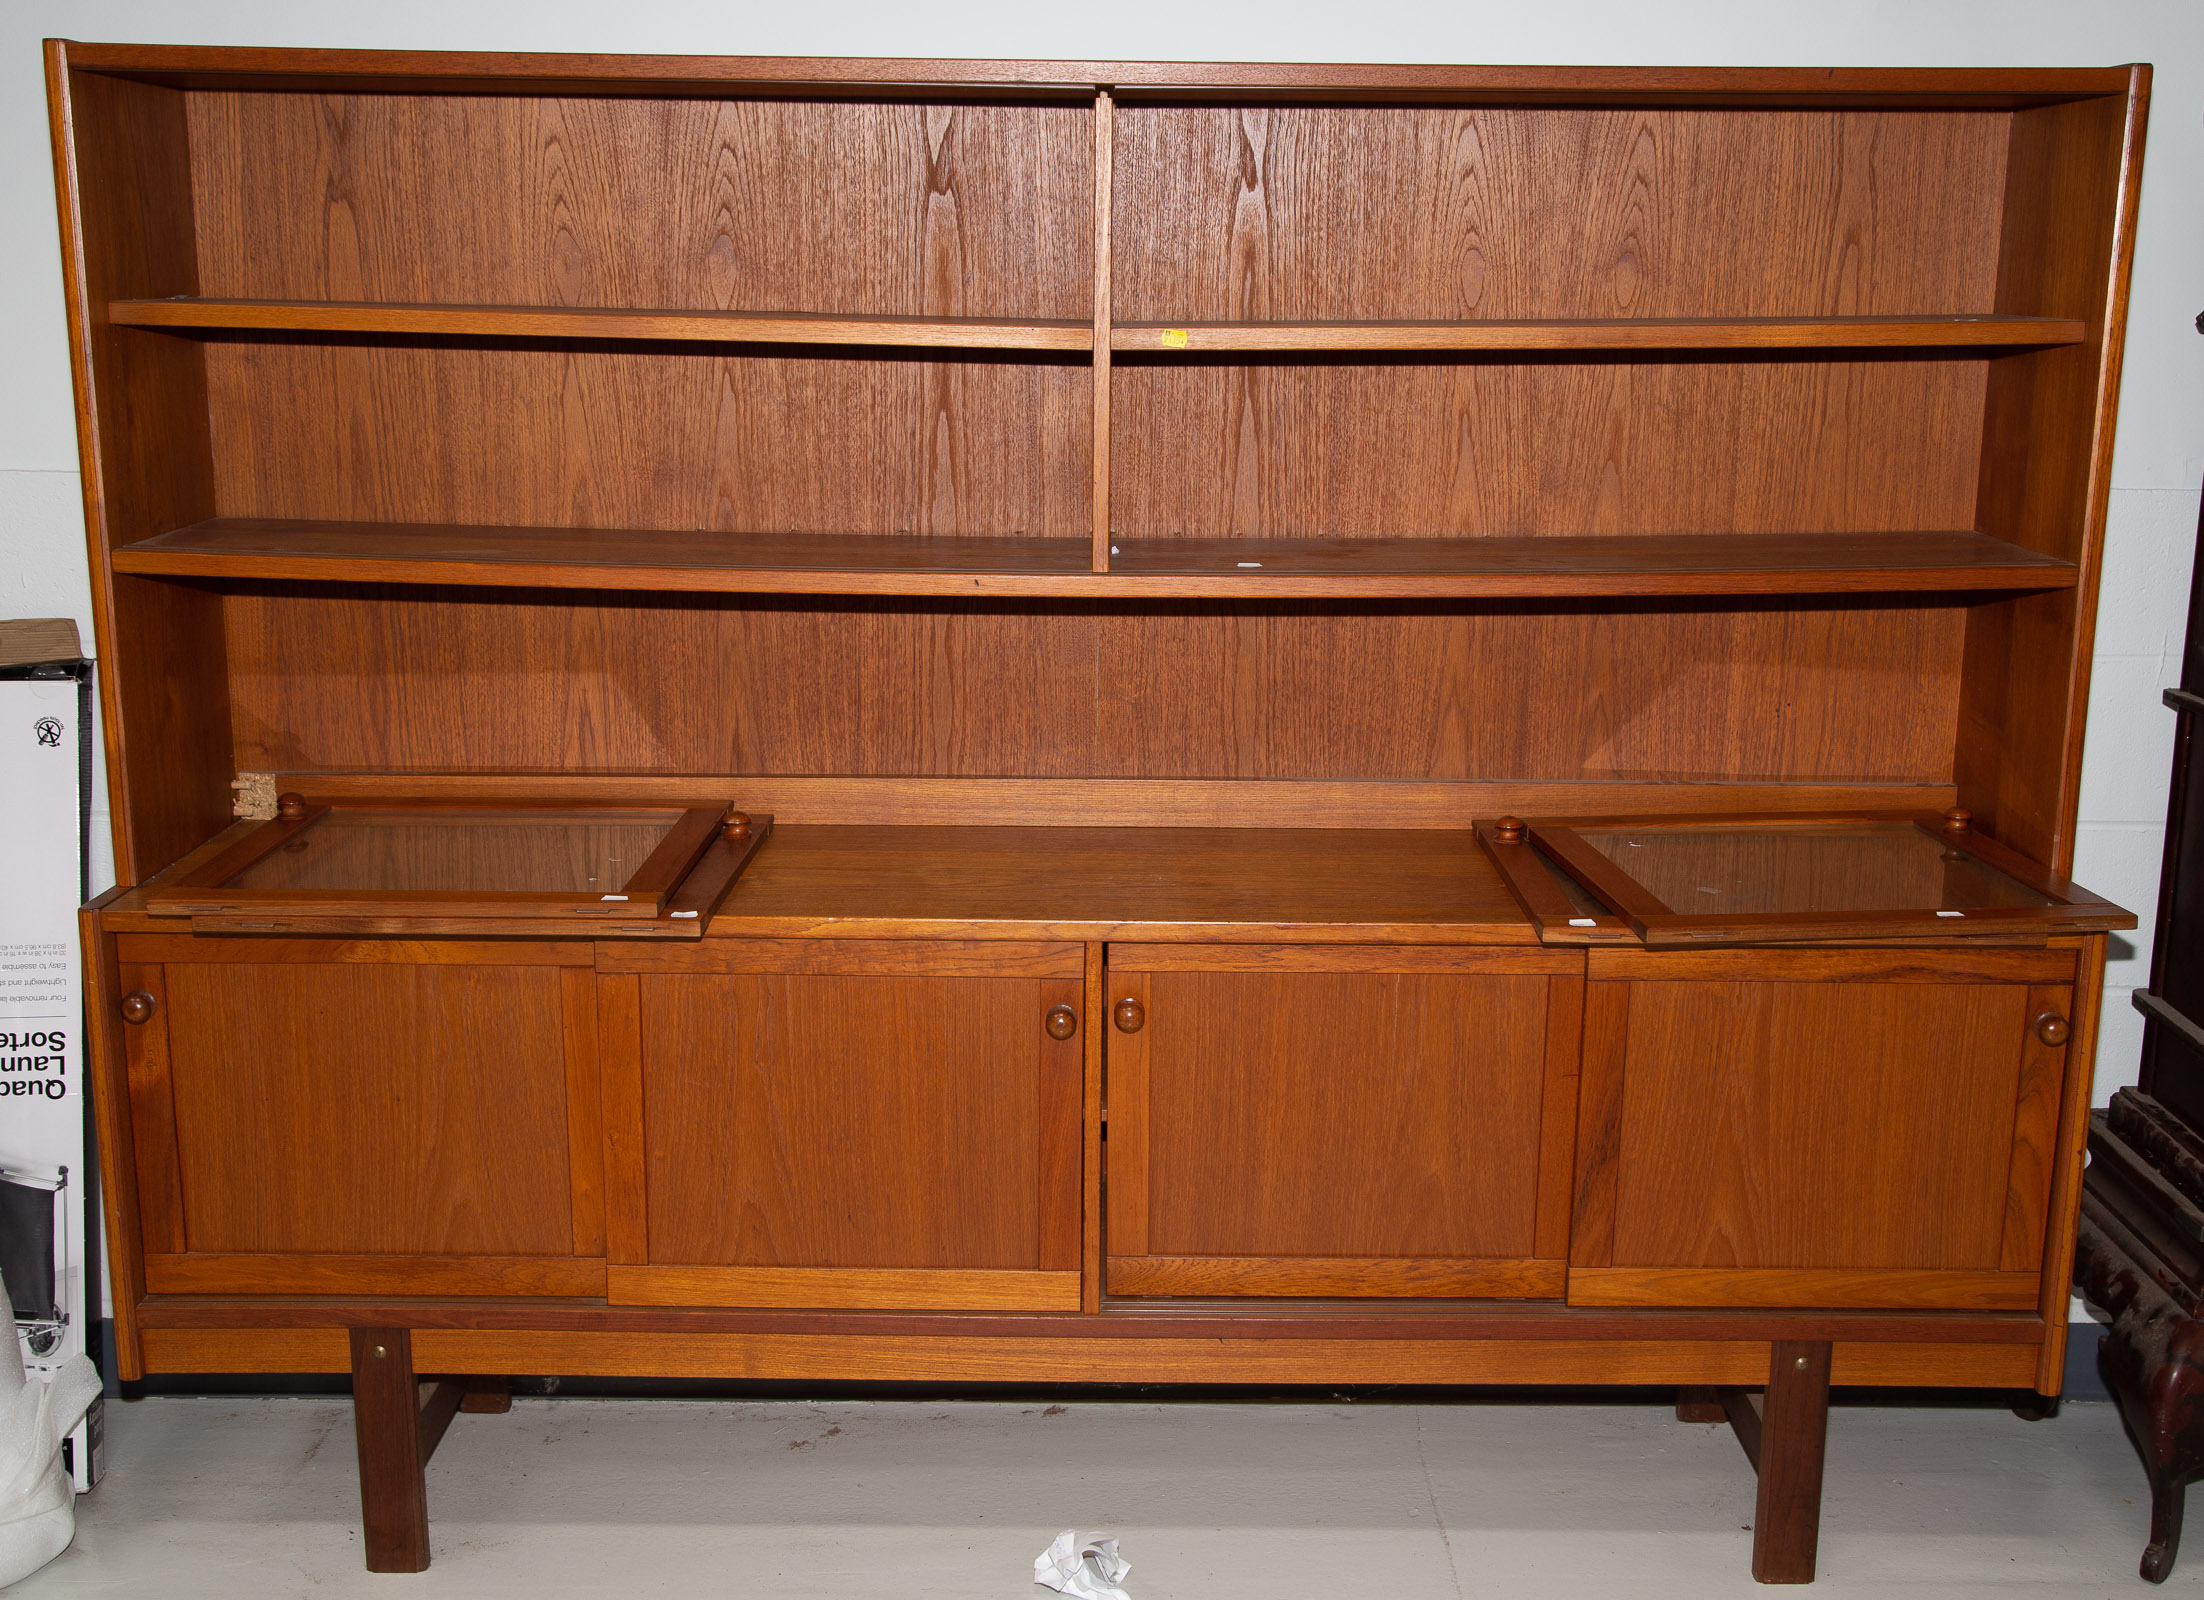 MID CENTURY MODERN WALL UNIT Possibly